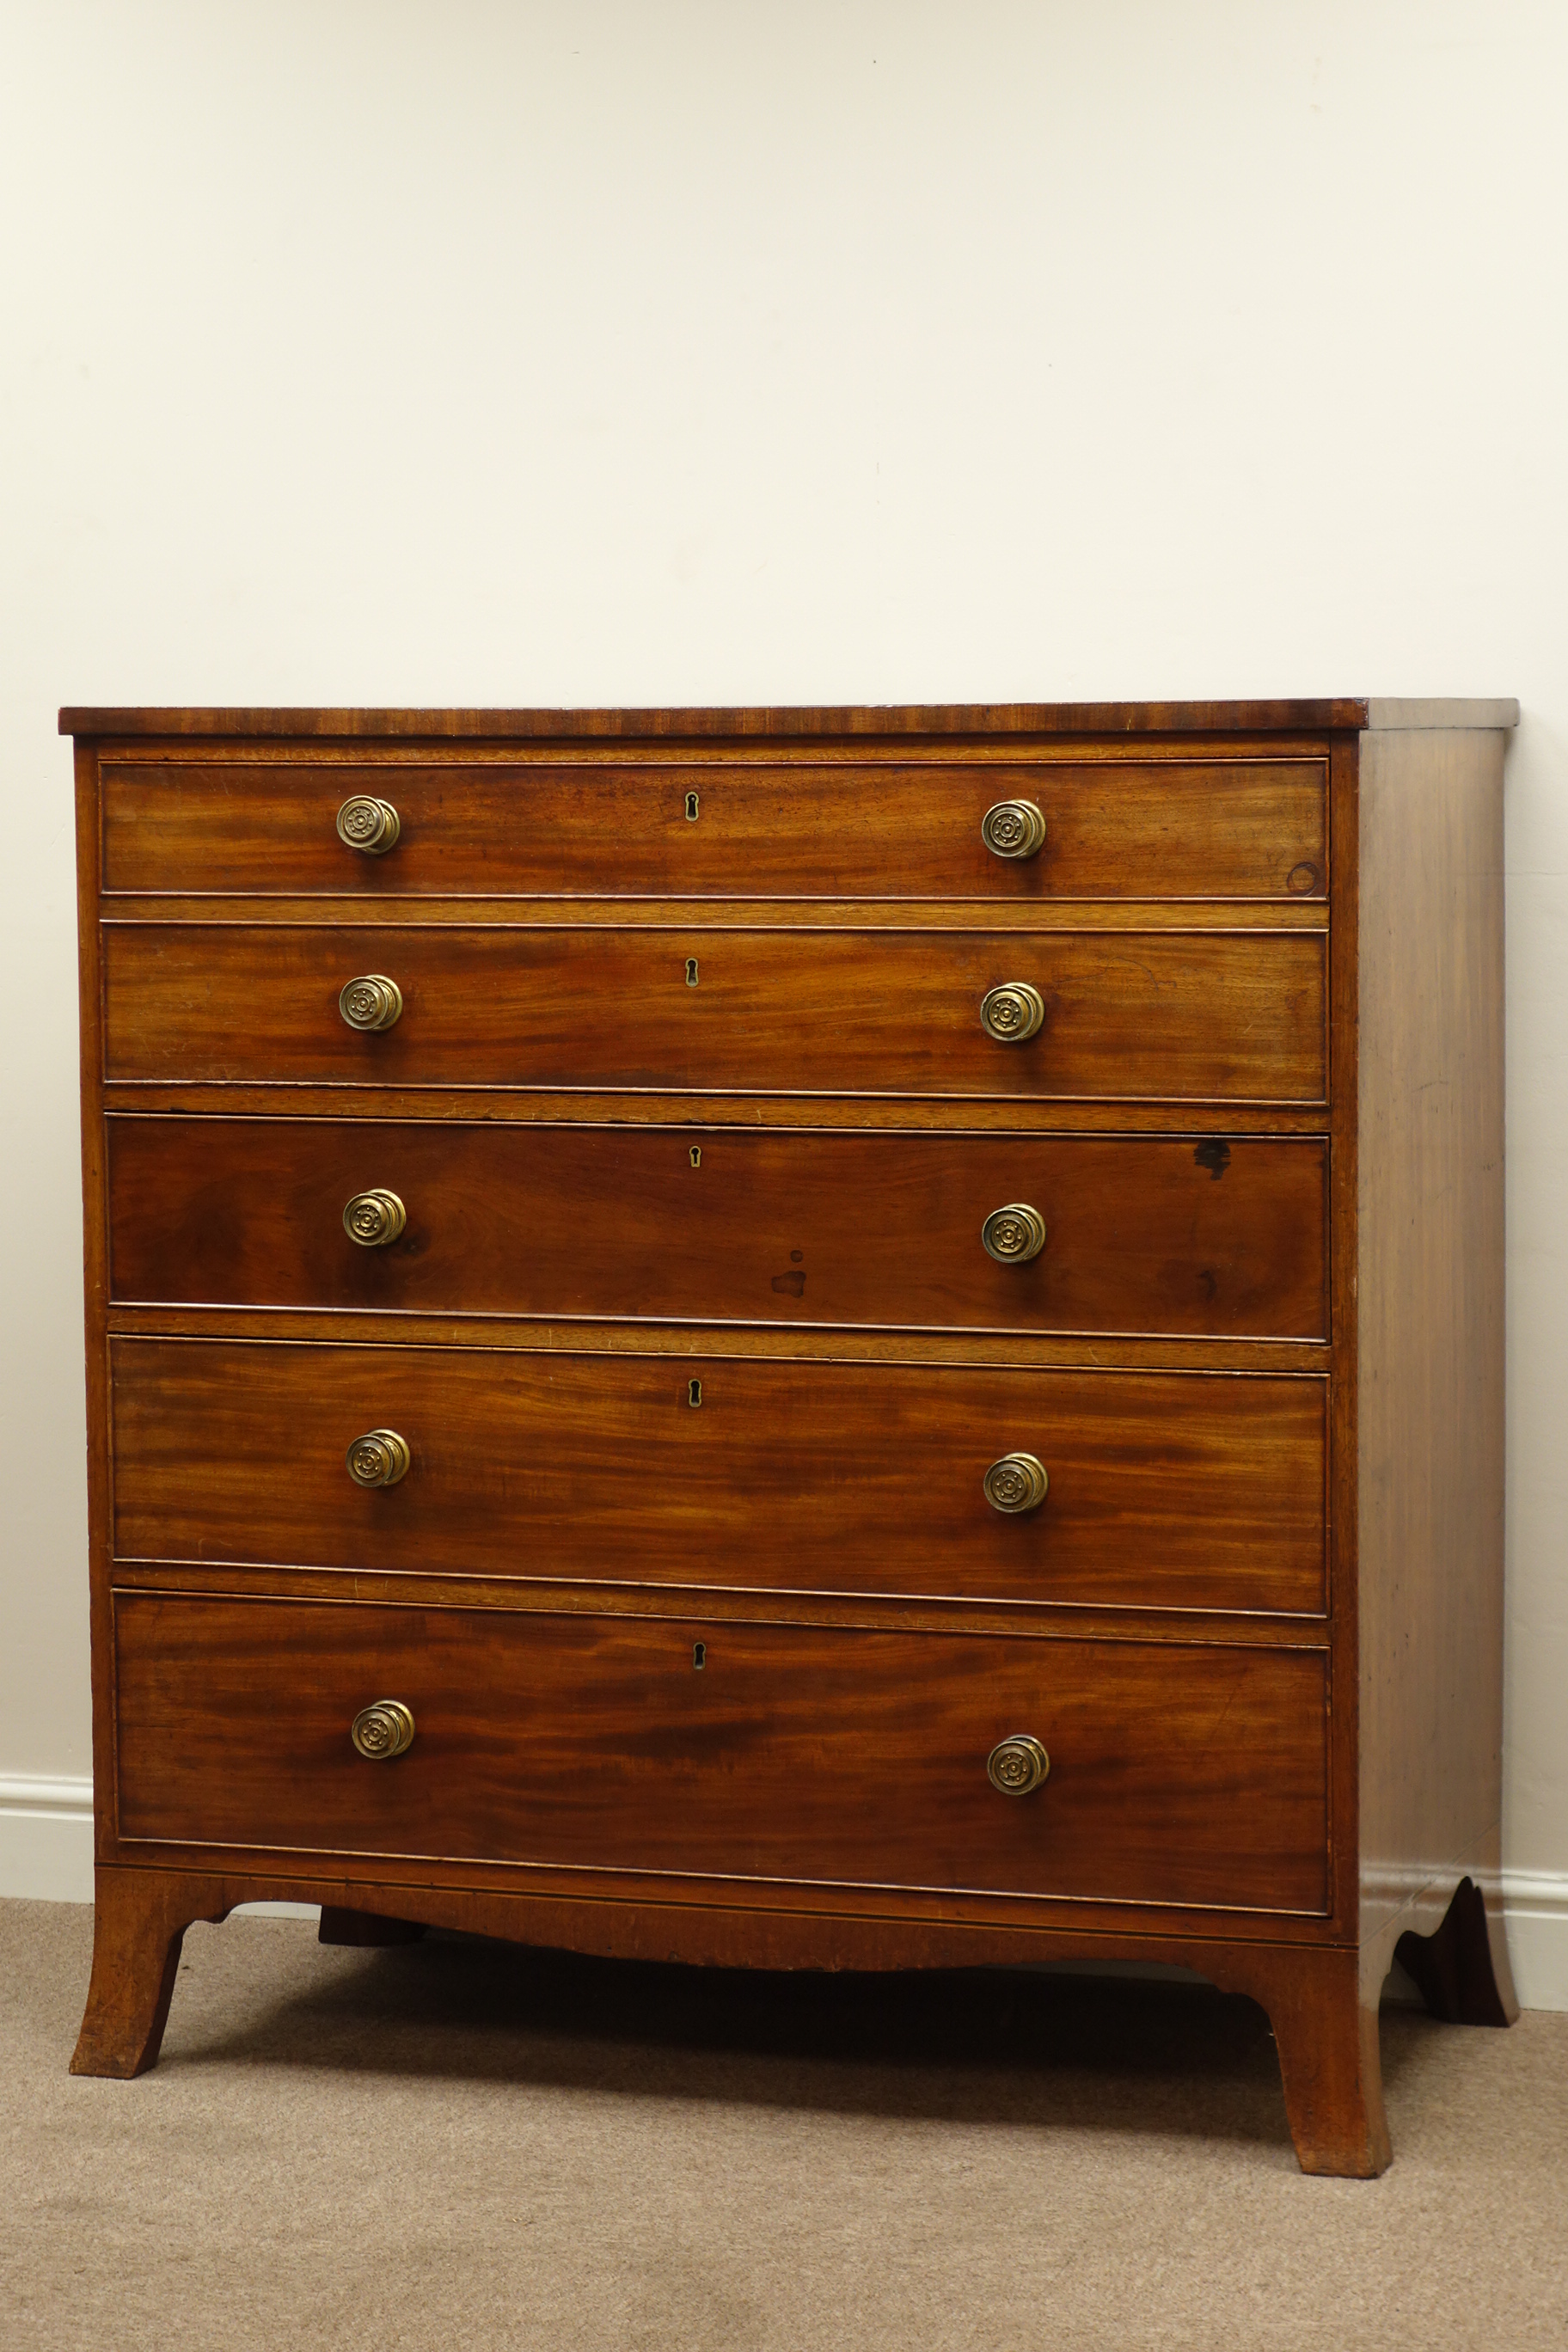 Early 19th century mahogany secretaire chest, fall front drawer with baize lined interior,